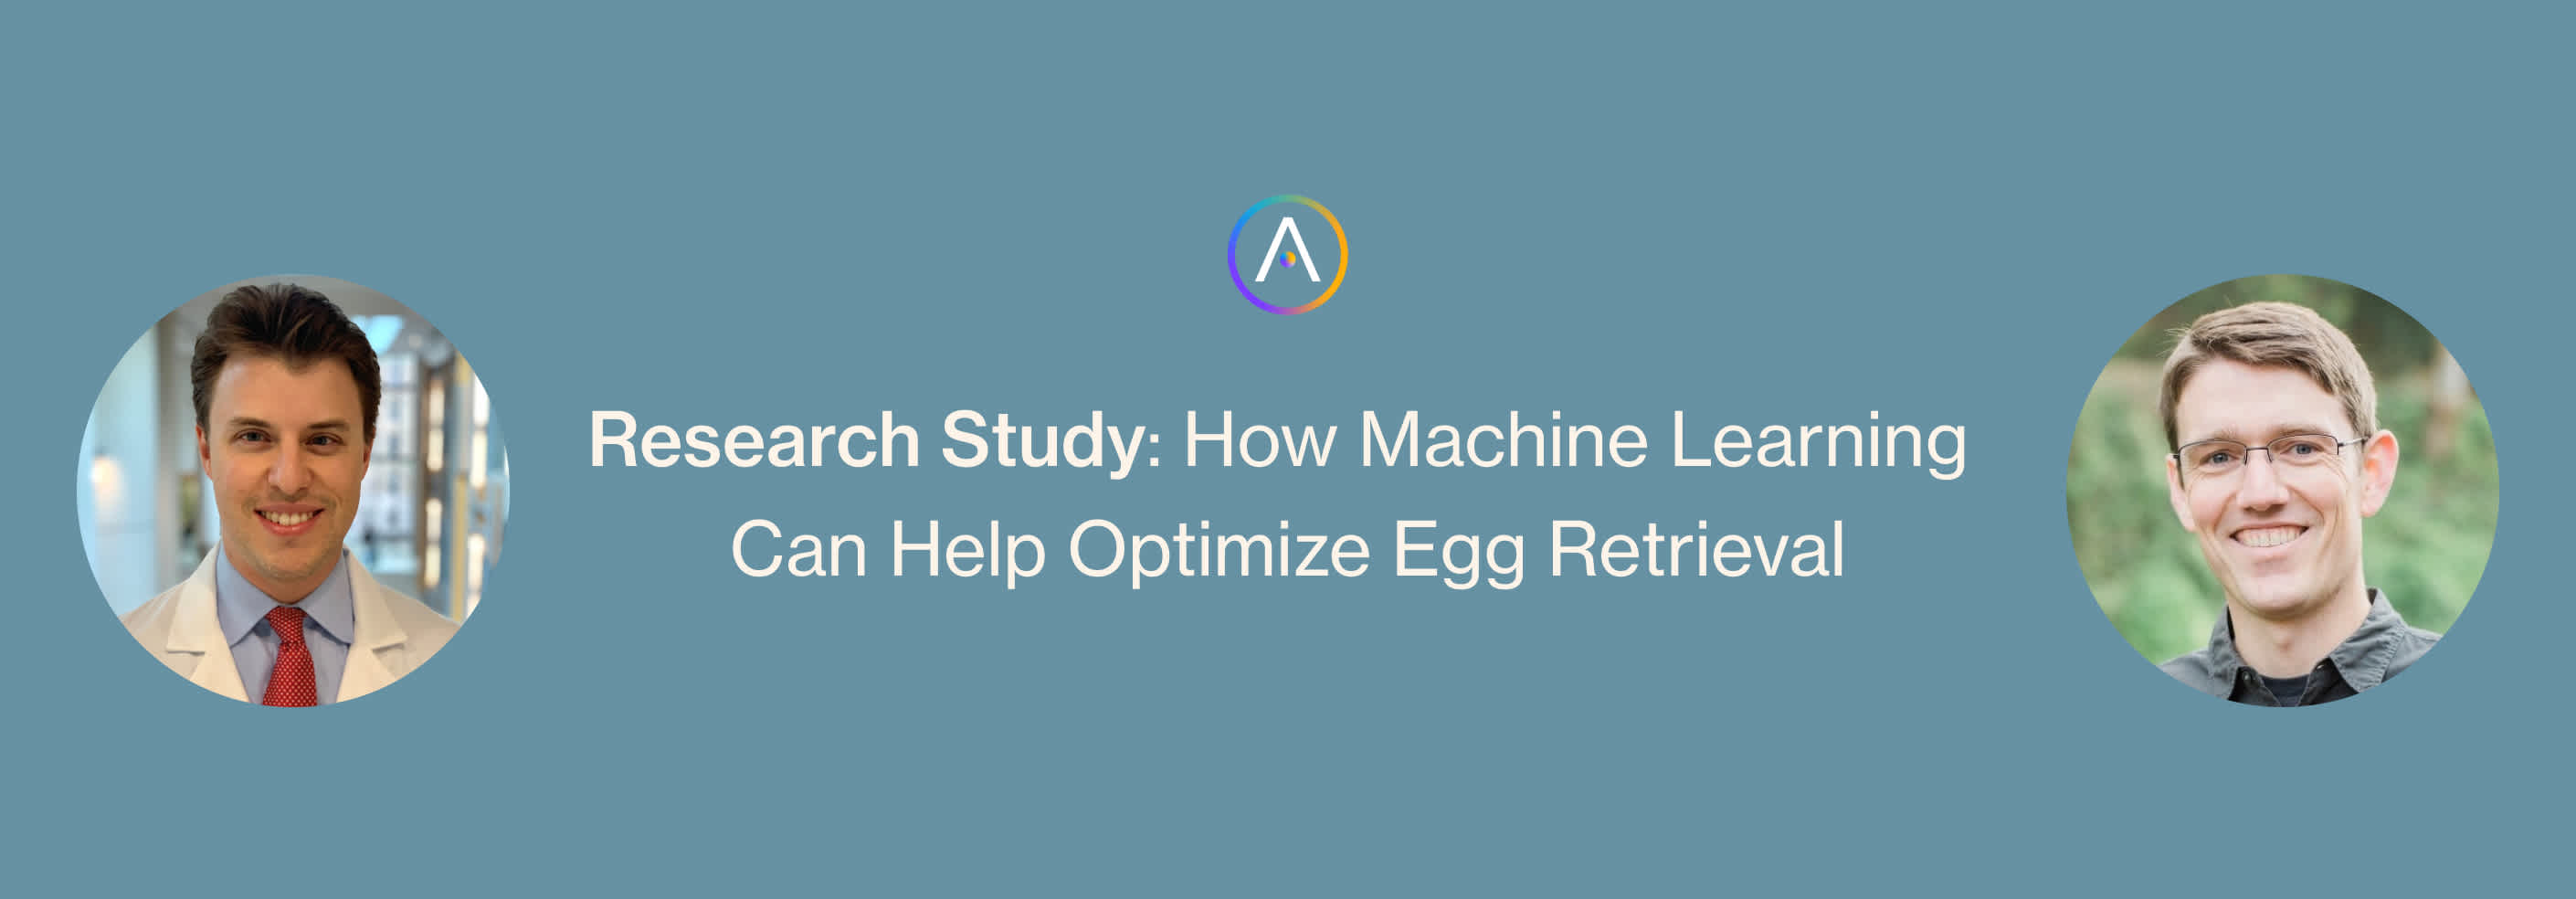 How Machine Learning Can Help Optimize Egg Retrieval